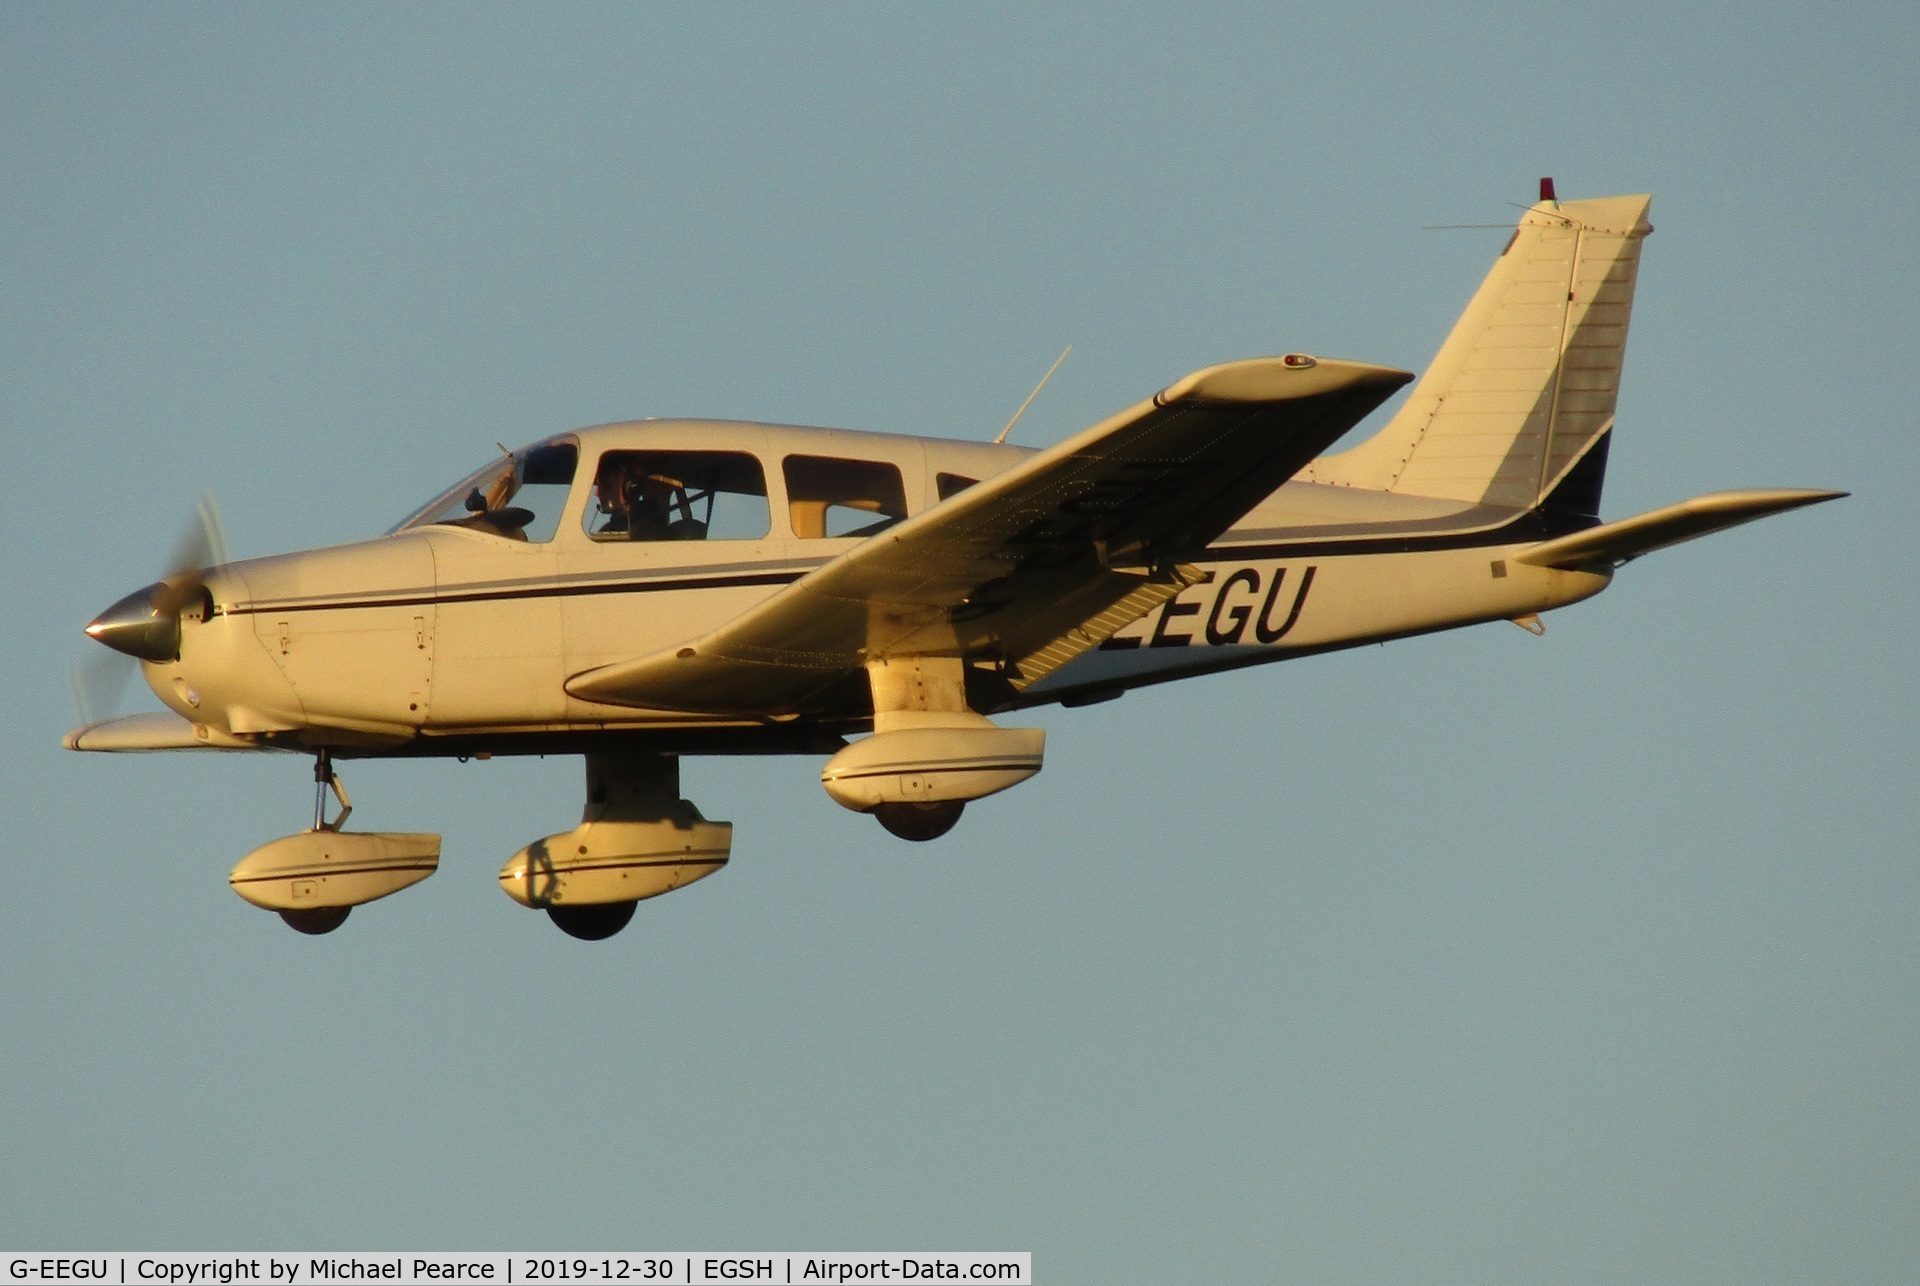 G-EEGU, 1979 Piper PA-28-161 Cherokee Warrior II C/N 28-7916457, On final for RWY 27, carrying out missed approach training.